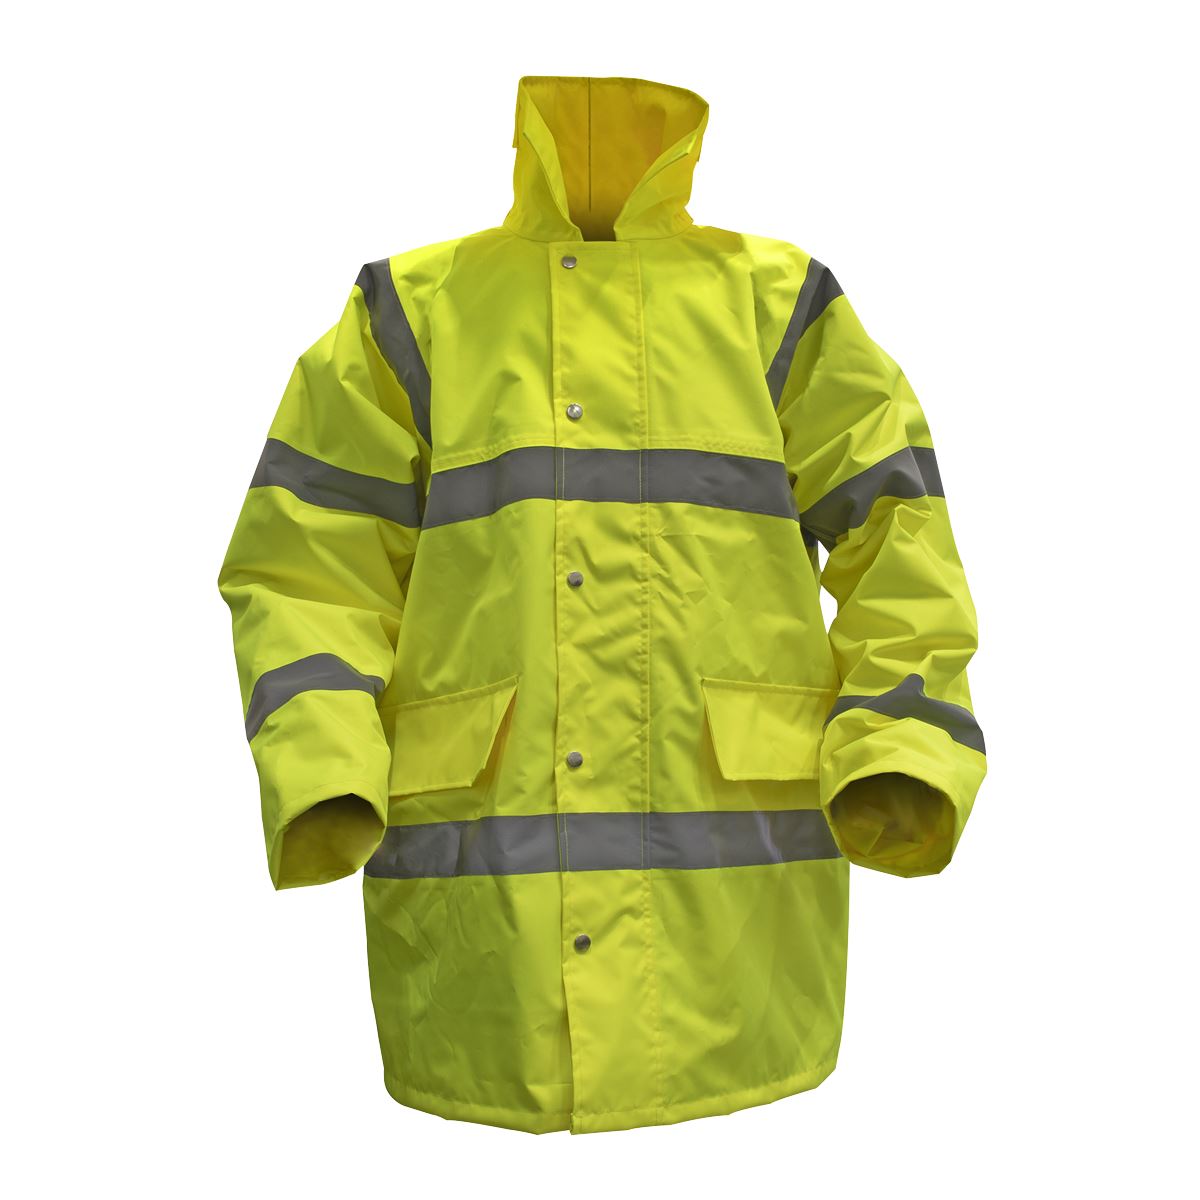 Worksafe by Sealey Hi-Vis Yellow Motorway Jacket with Quilted Lining - X-Large